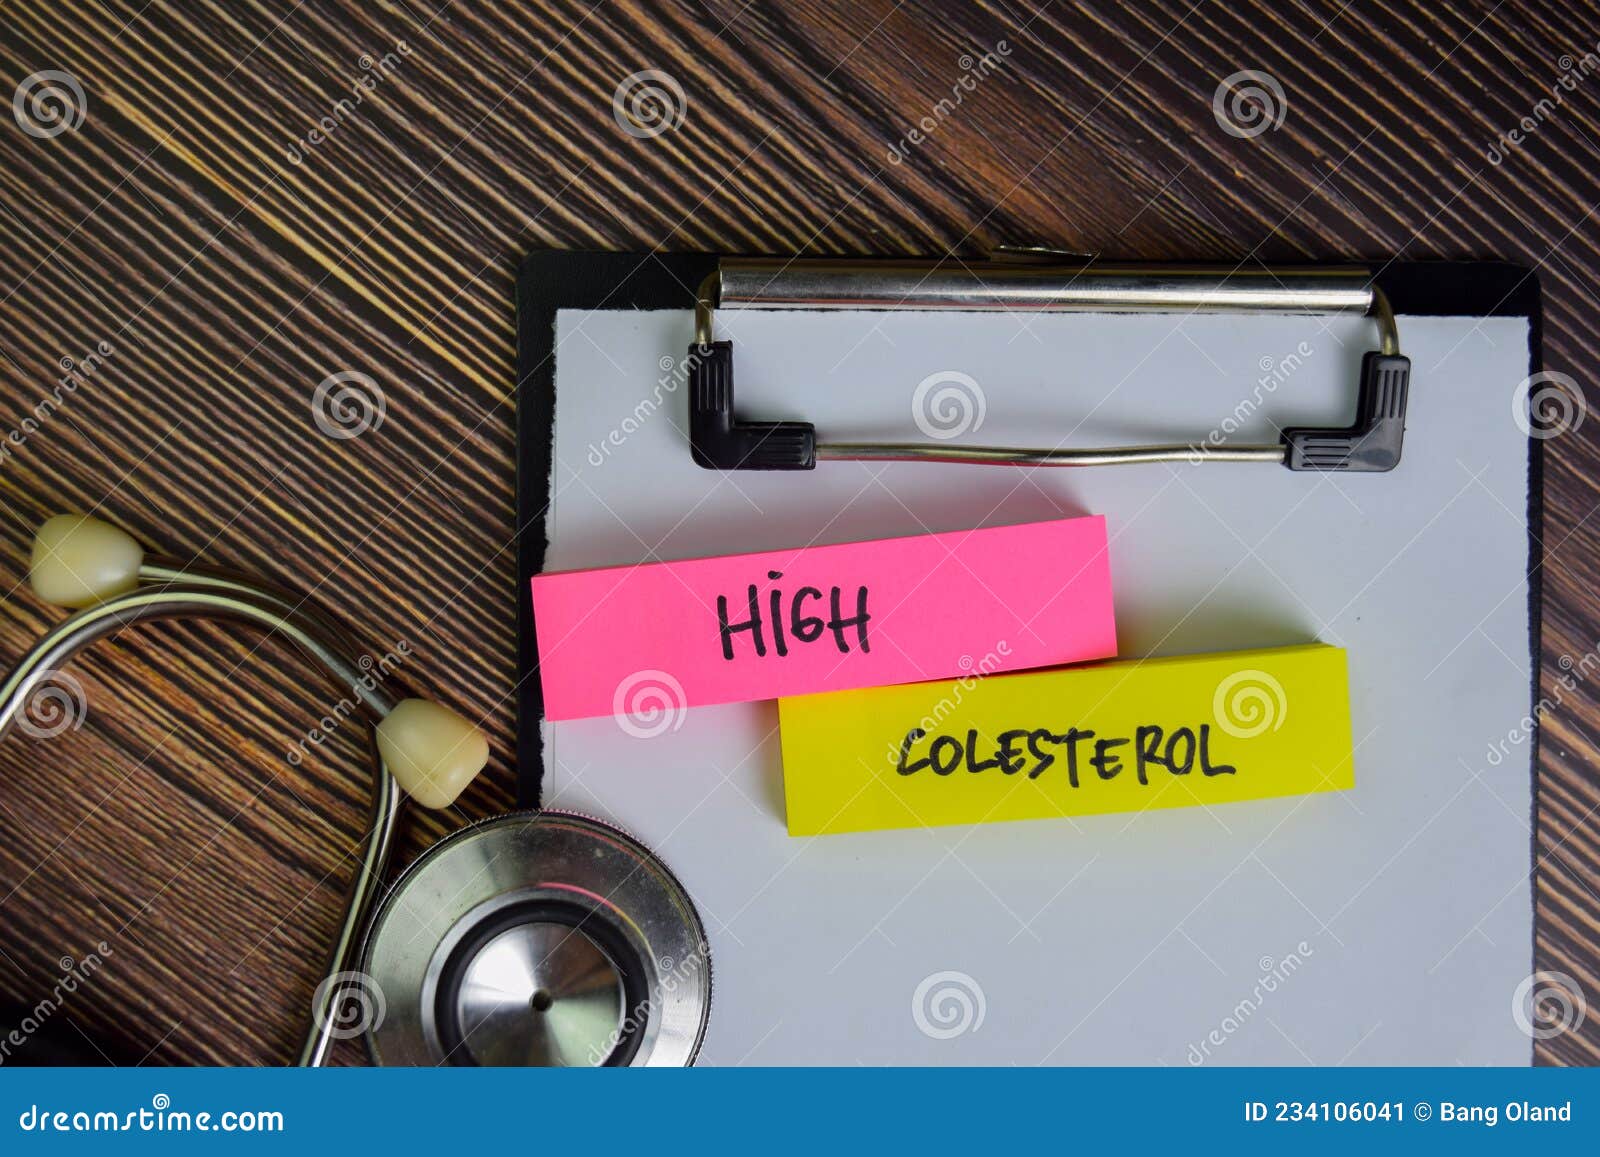 high colesterol write on sticky notes  on wooden table